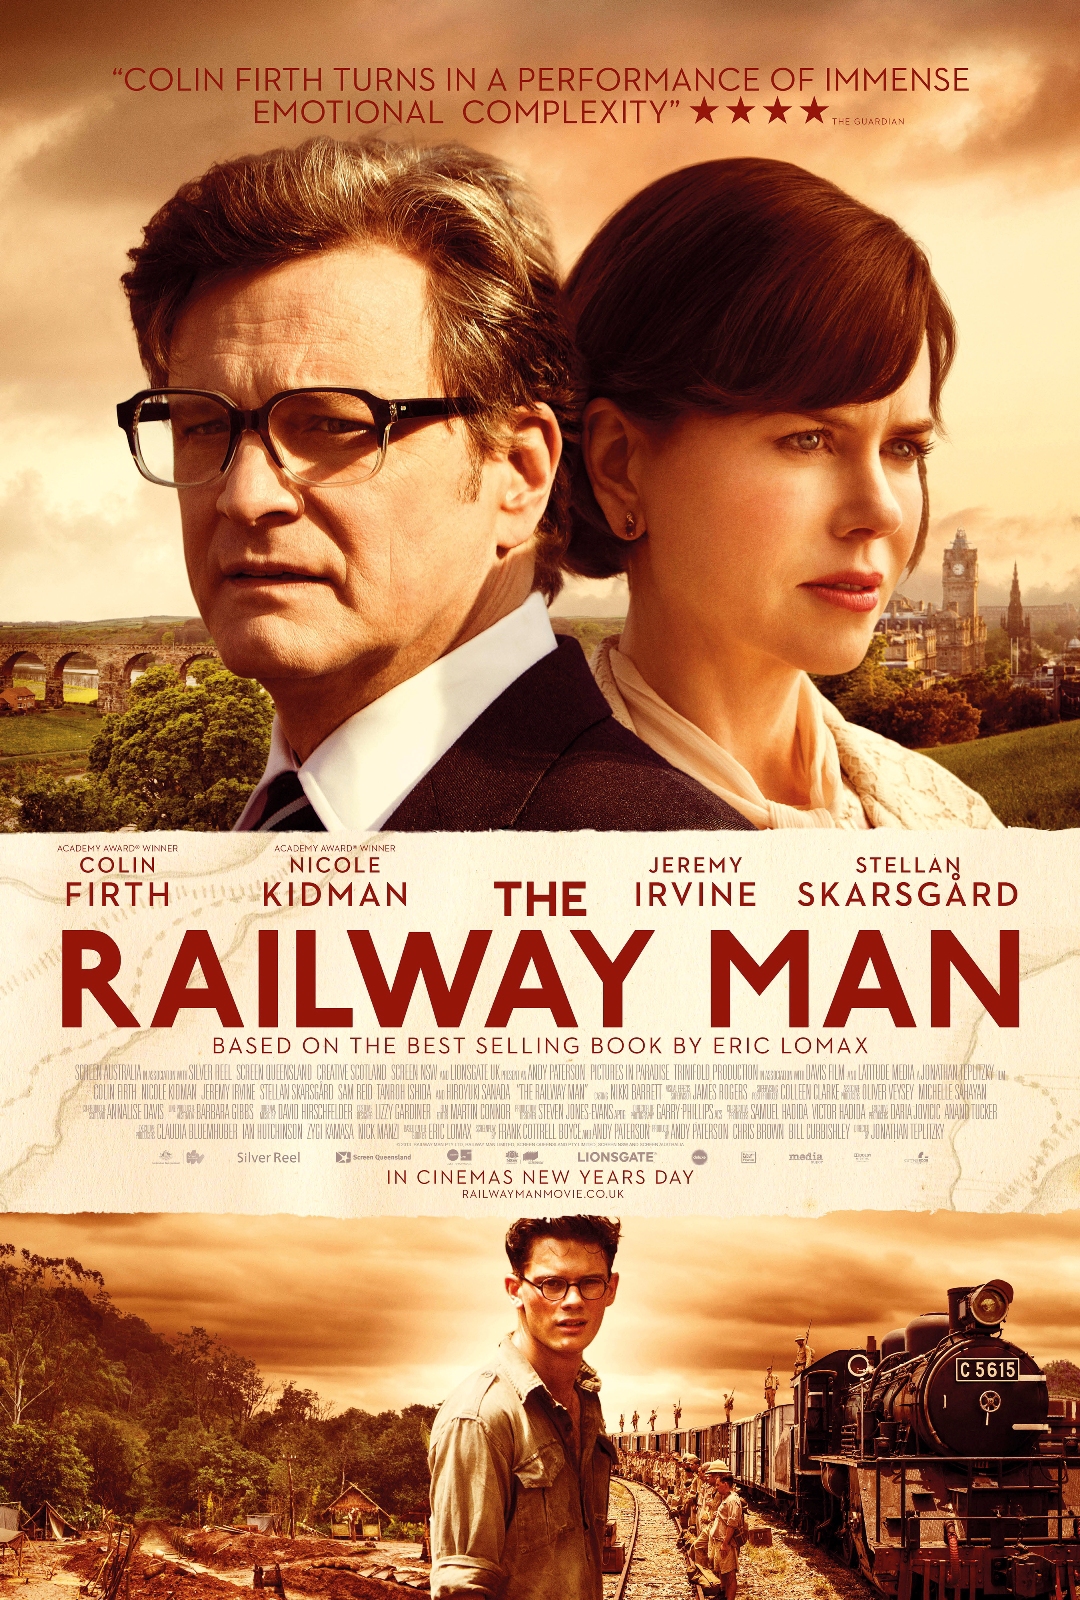 The Railway Man (2013) Technical Specifications